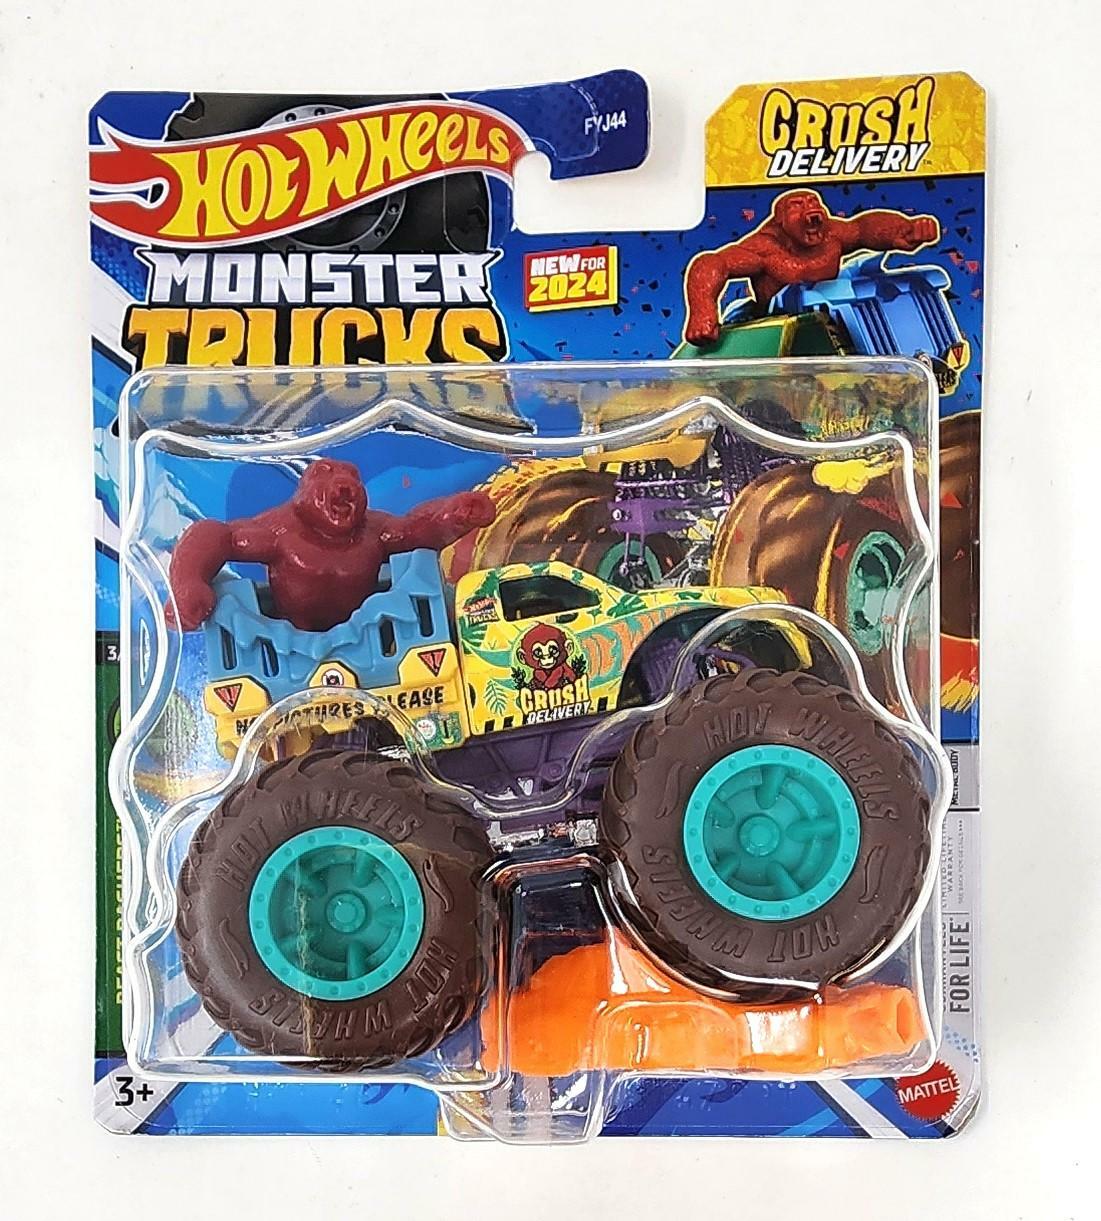 Hot Wheels Monster Trucks 1:64 Scale Die-Cast Vehicle | Crush Delivery | HTM25